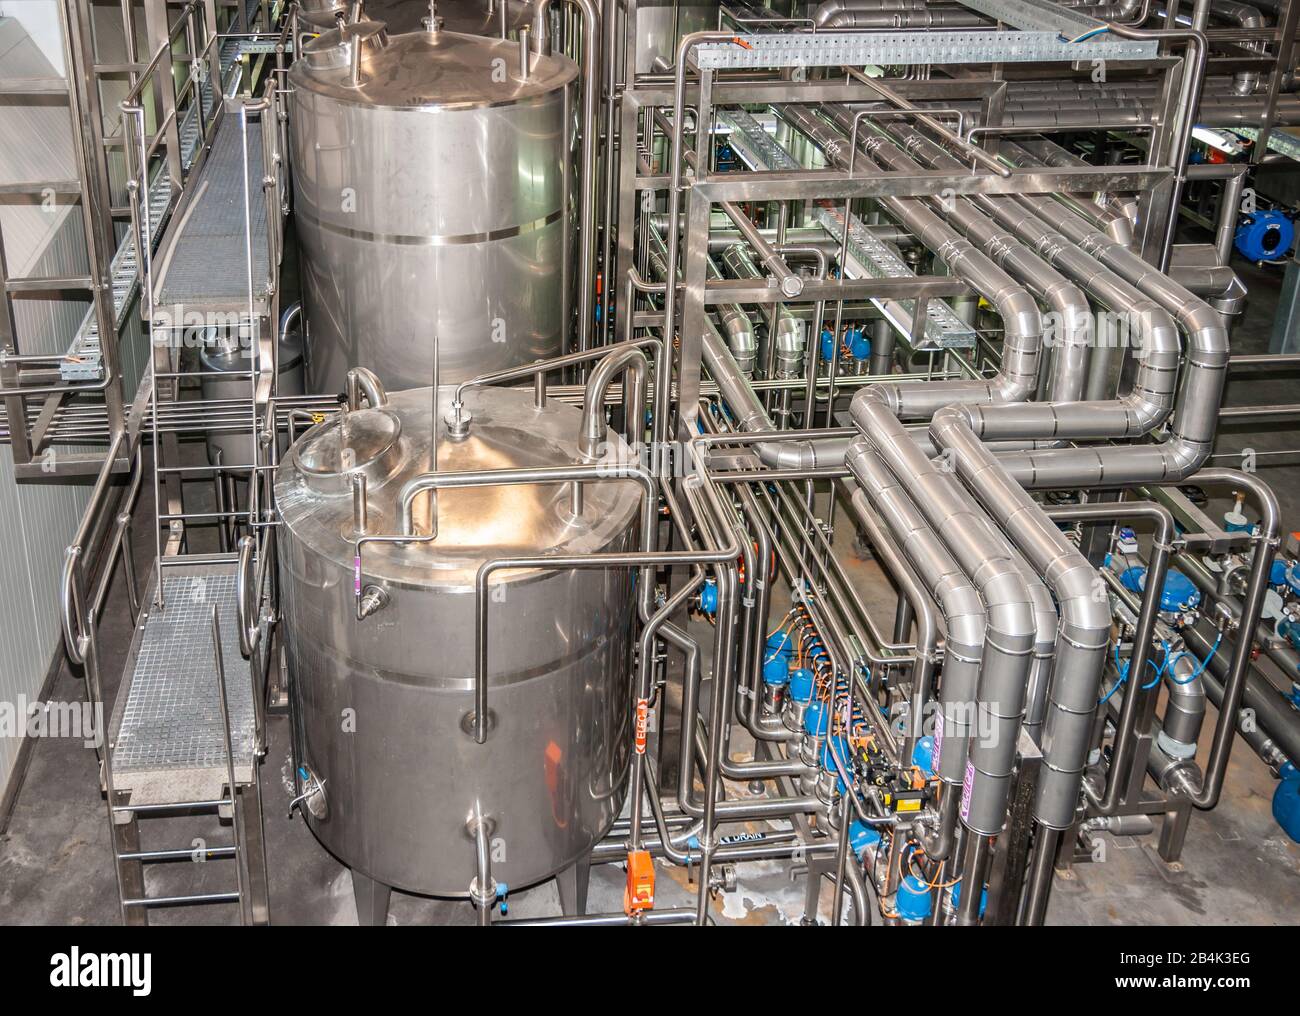 Brisbane, Australia - December 8, 2009: Castlemaine Perkins brewery. Intermediary tanks, plenty of pipelines for beer, water and CO2 in the filling pr Stock Photo